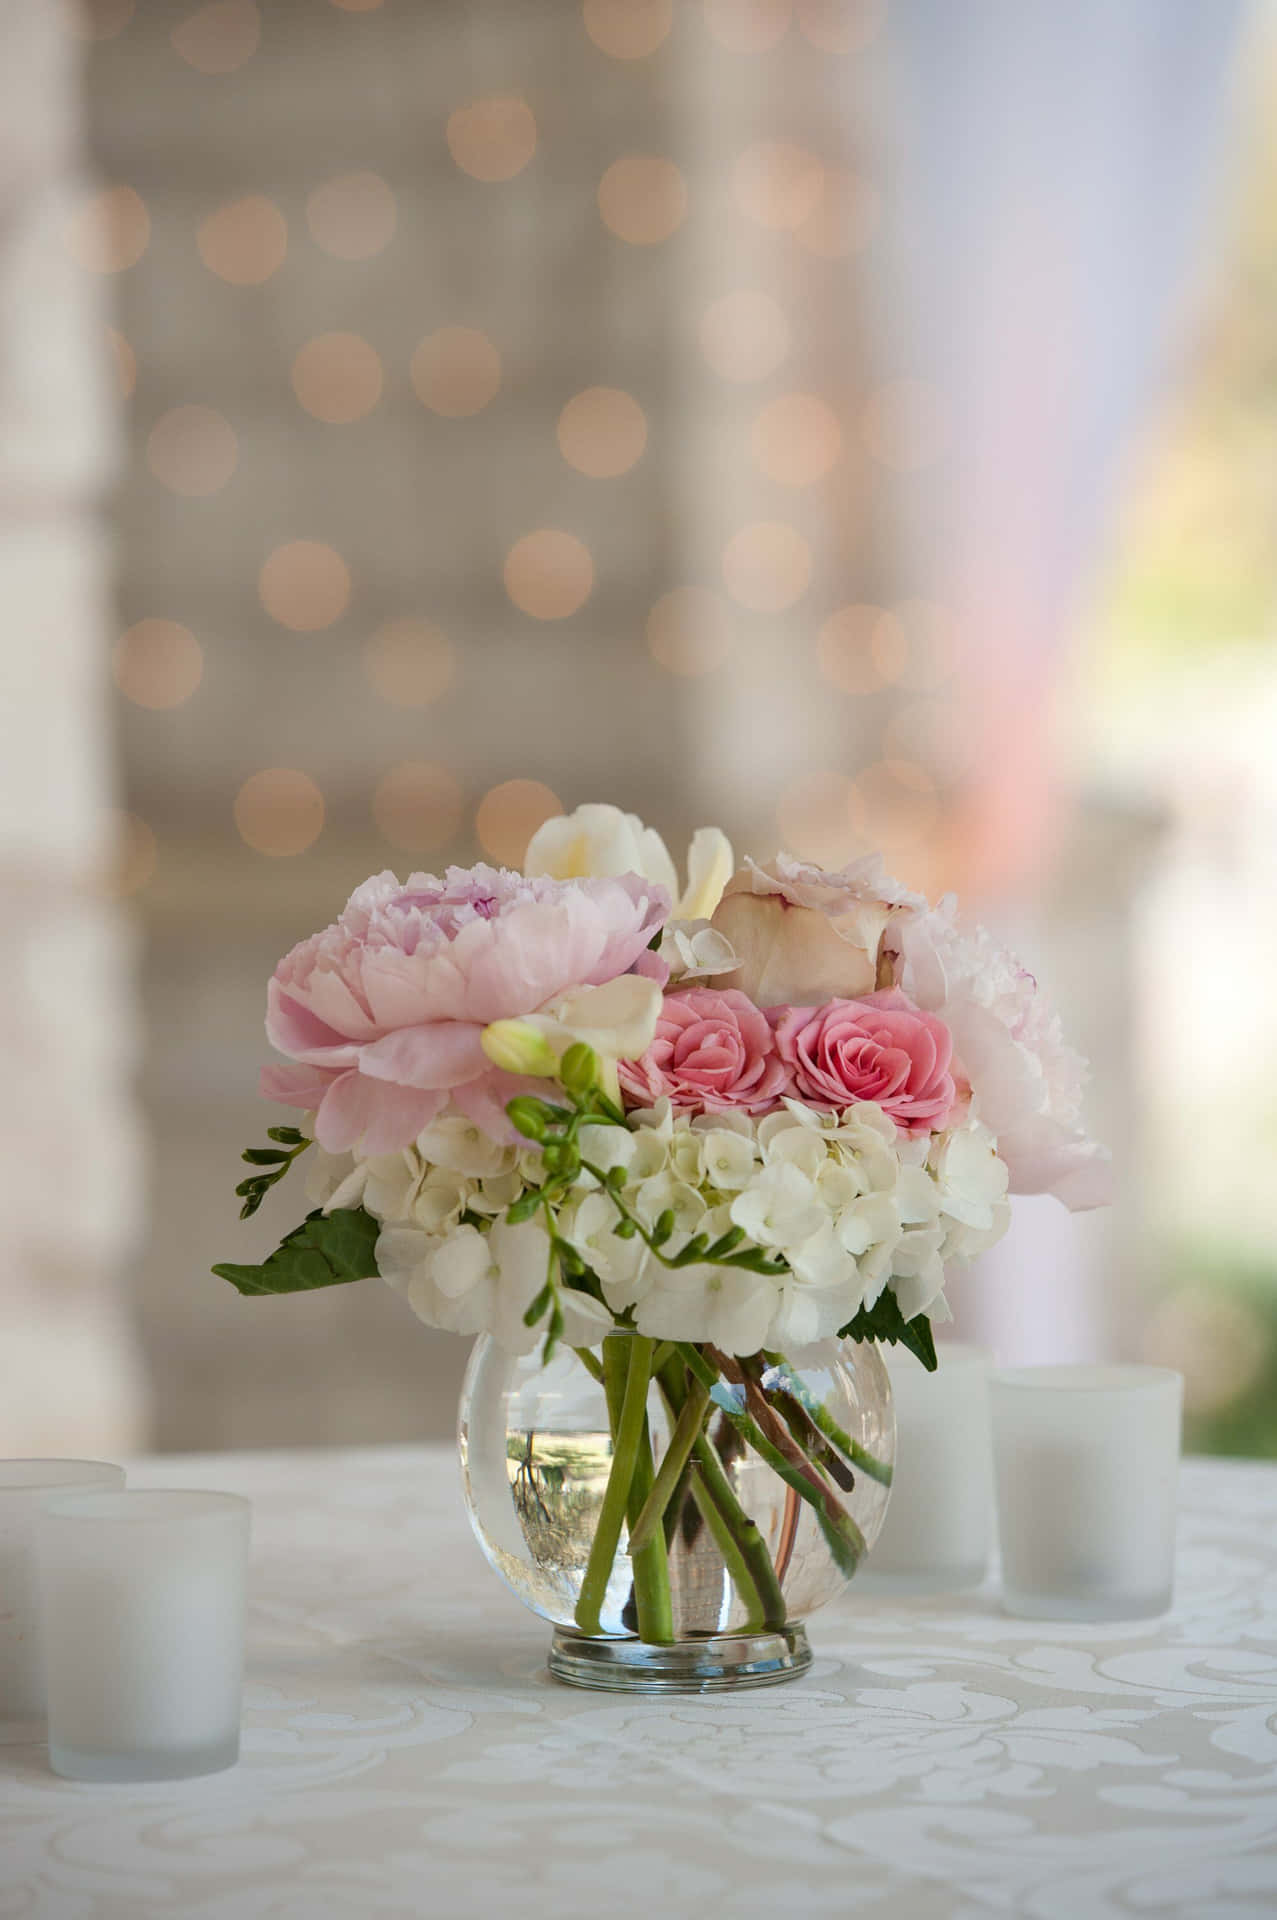 ‭Delightful Floral Centerpiece for Any Special Occasion Wallpaper